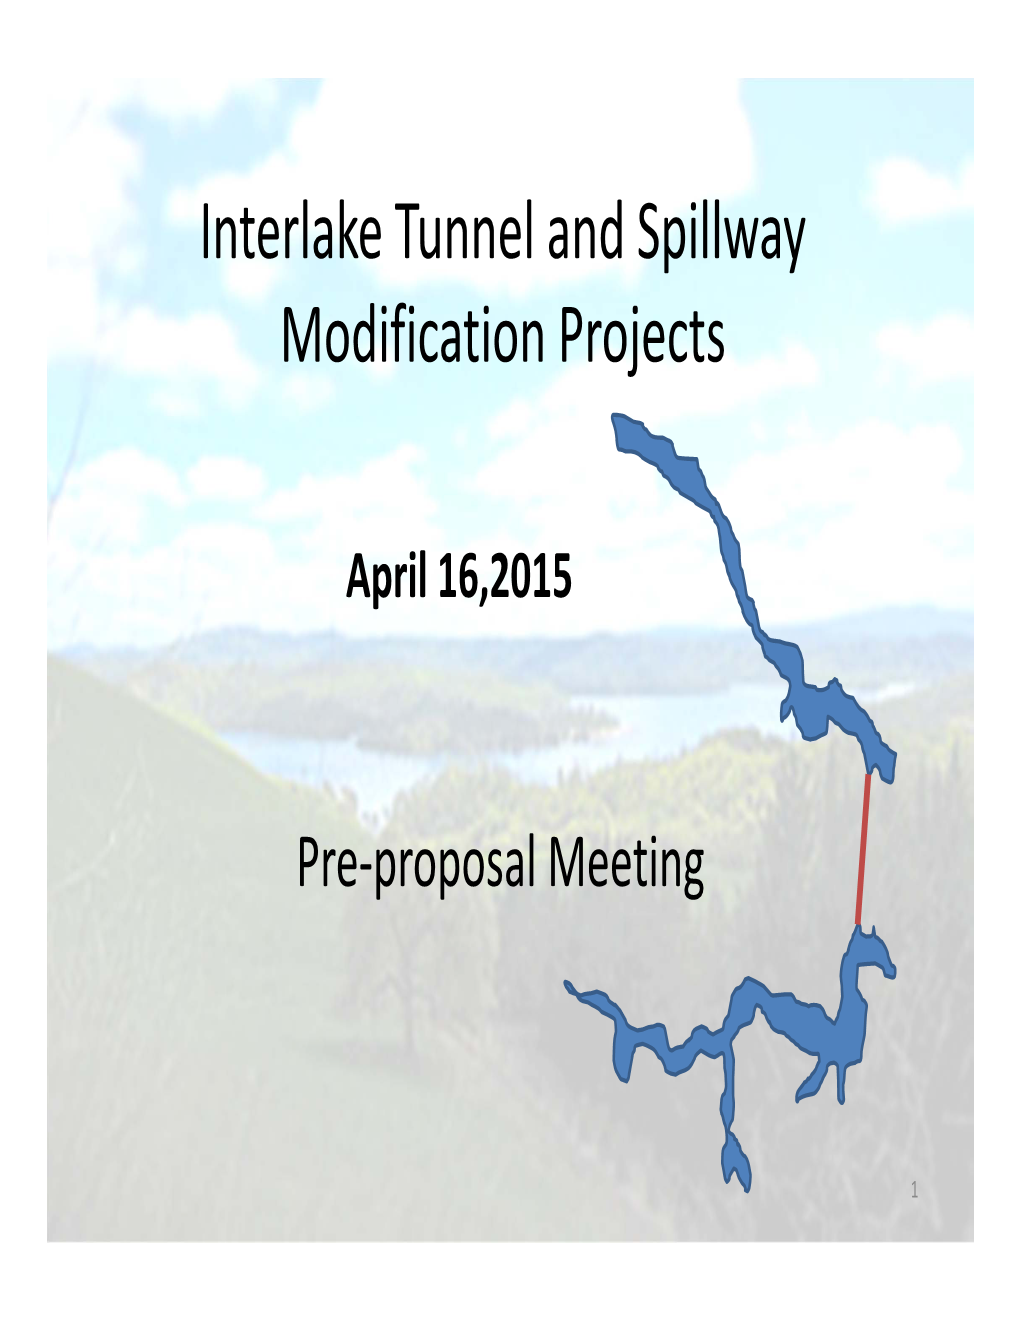 Interlake Tunnel and Spillway Modification Projects